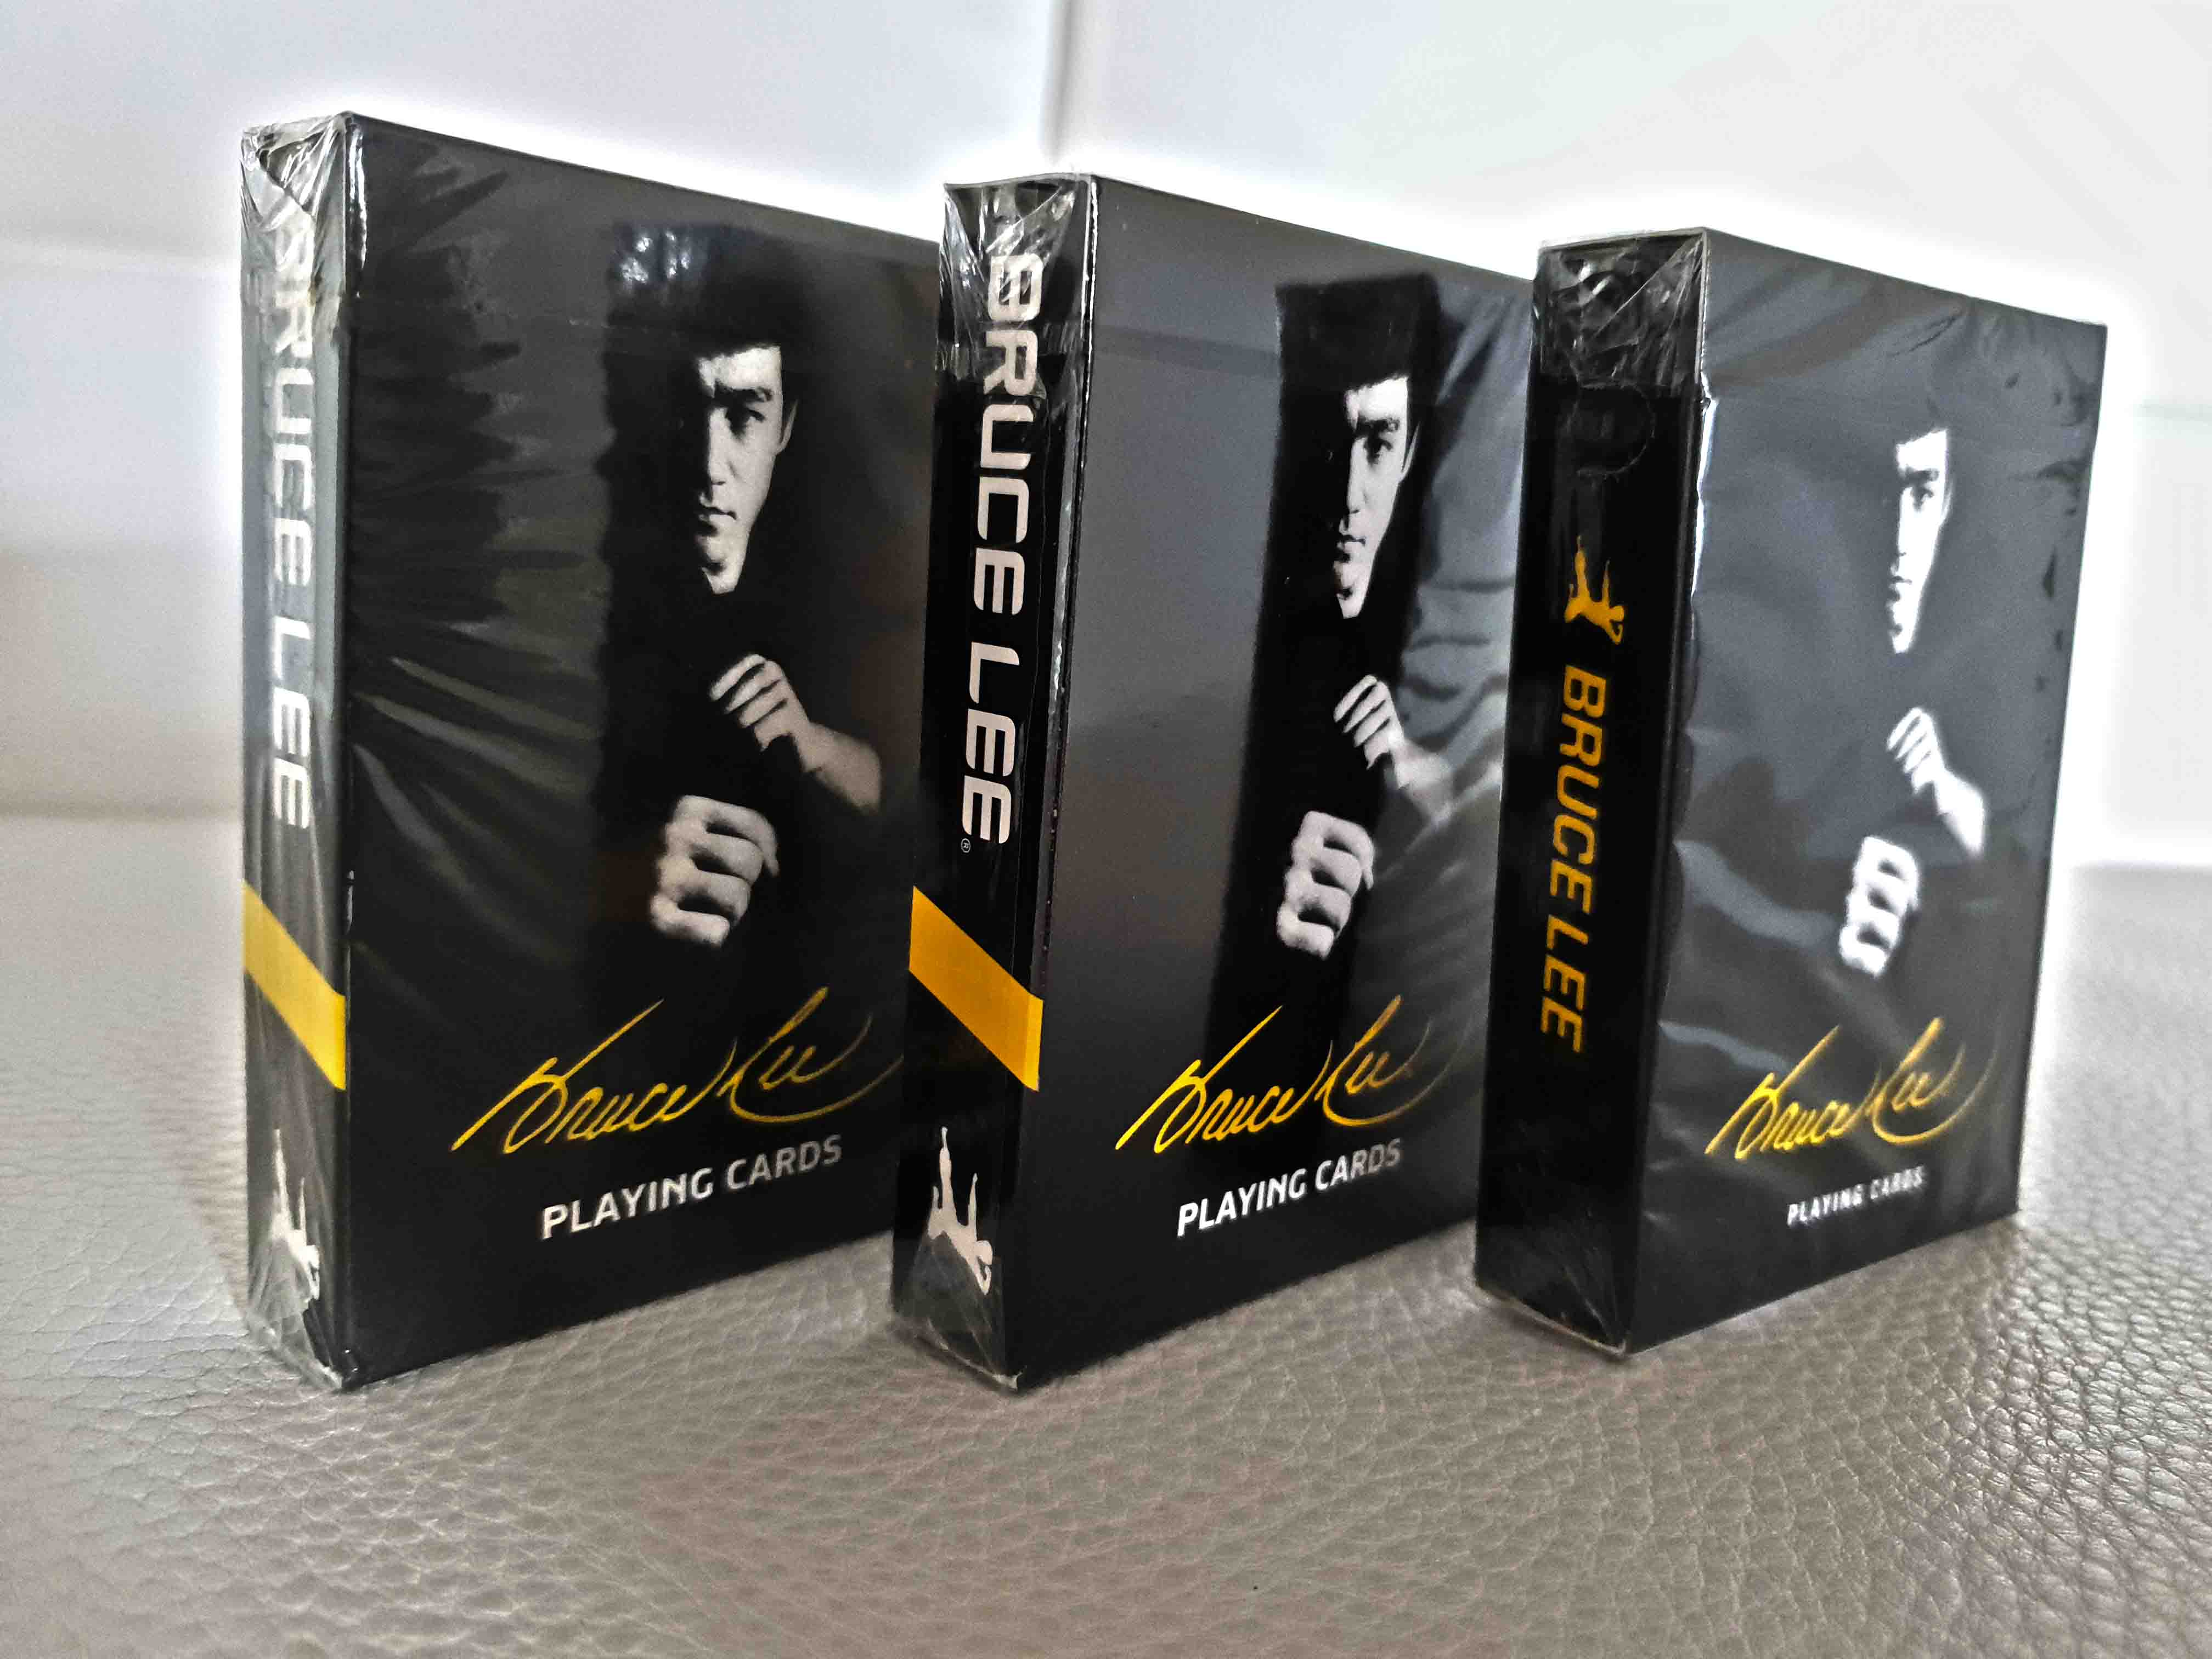 BRUCE LEE v3 deck by Art Of Play. Be playing cards, my friend 